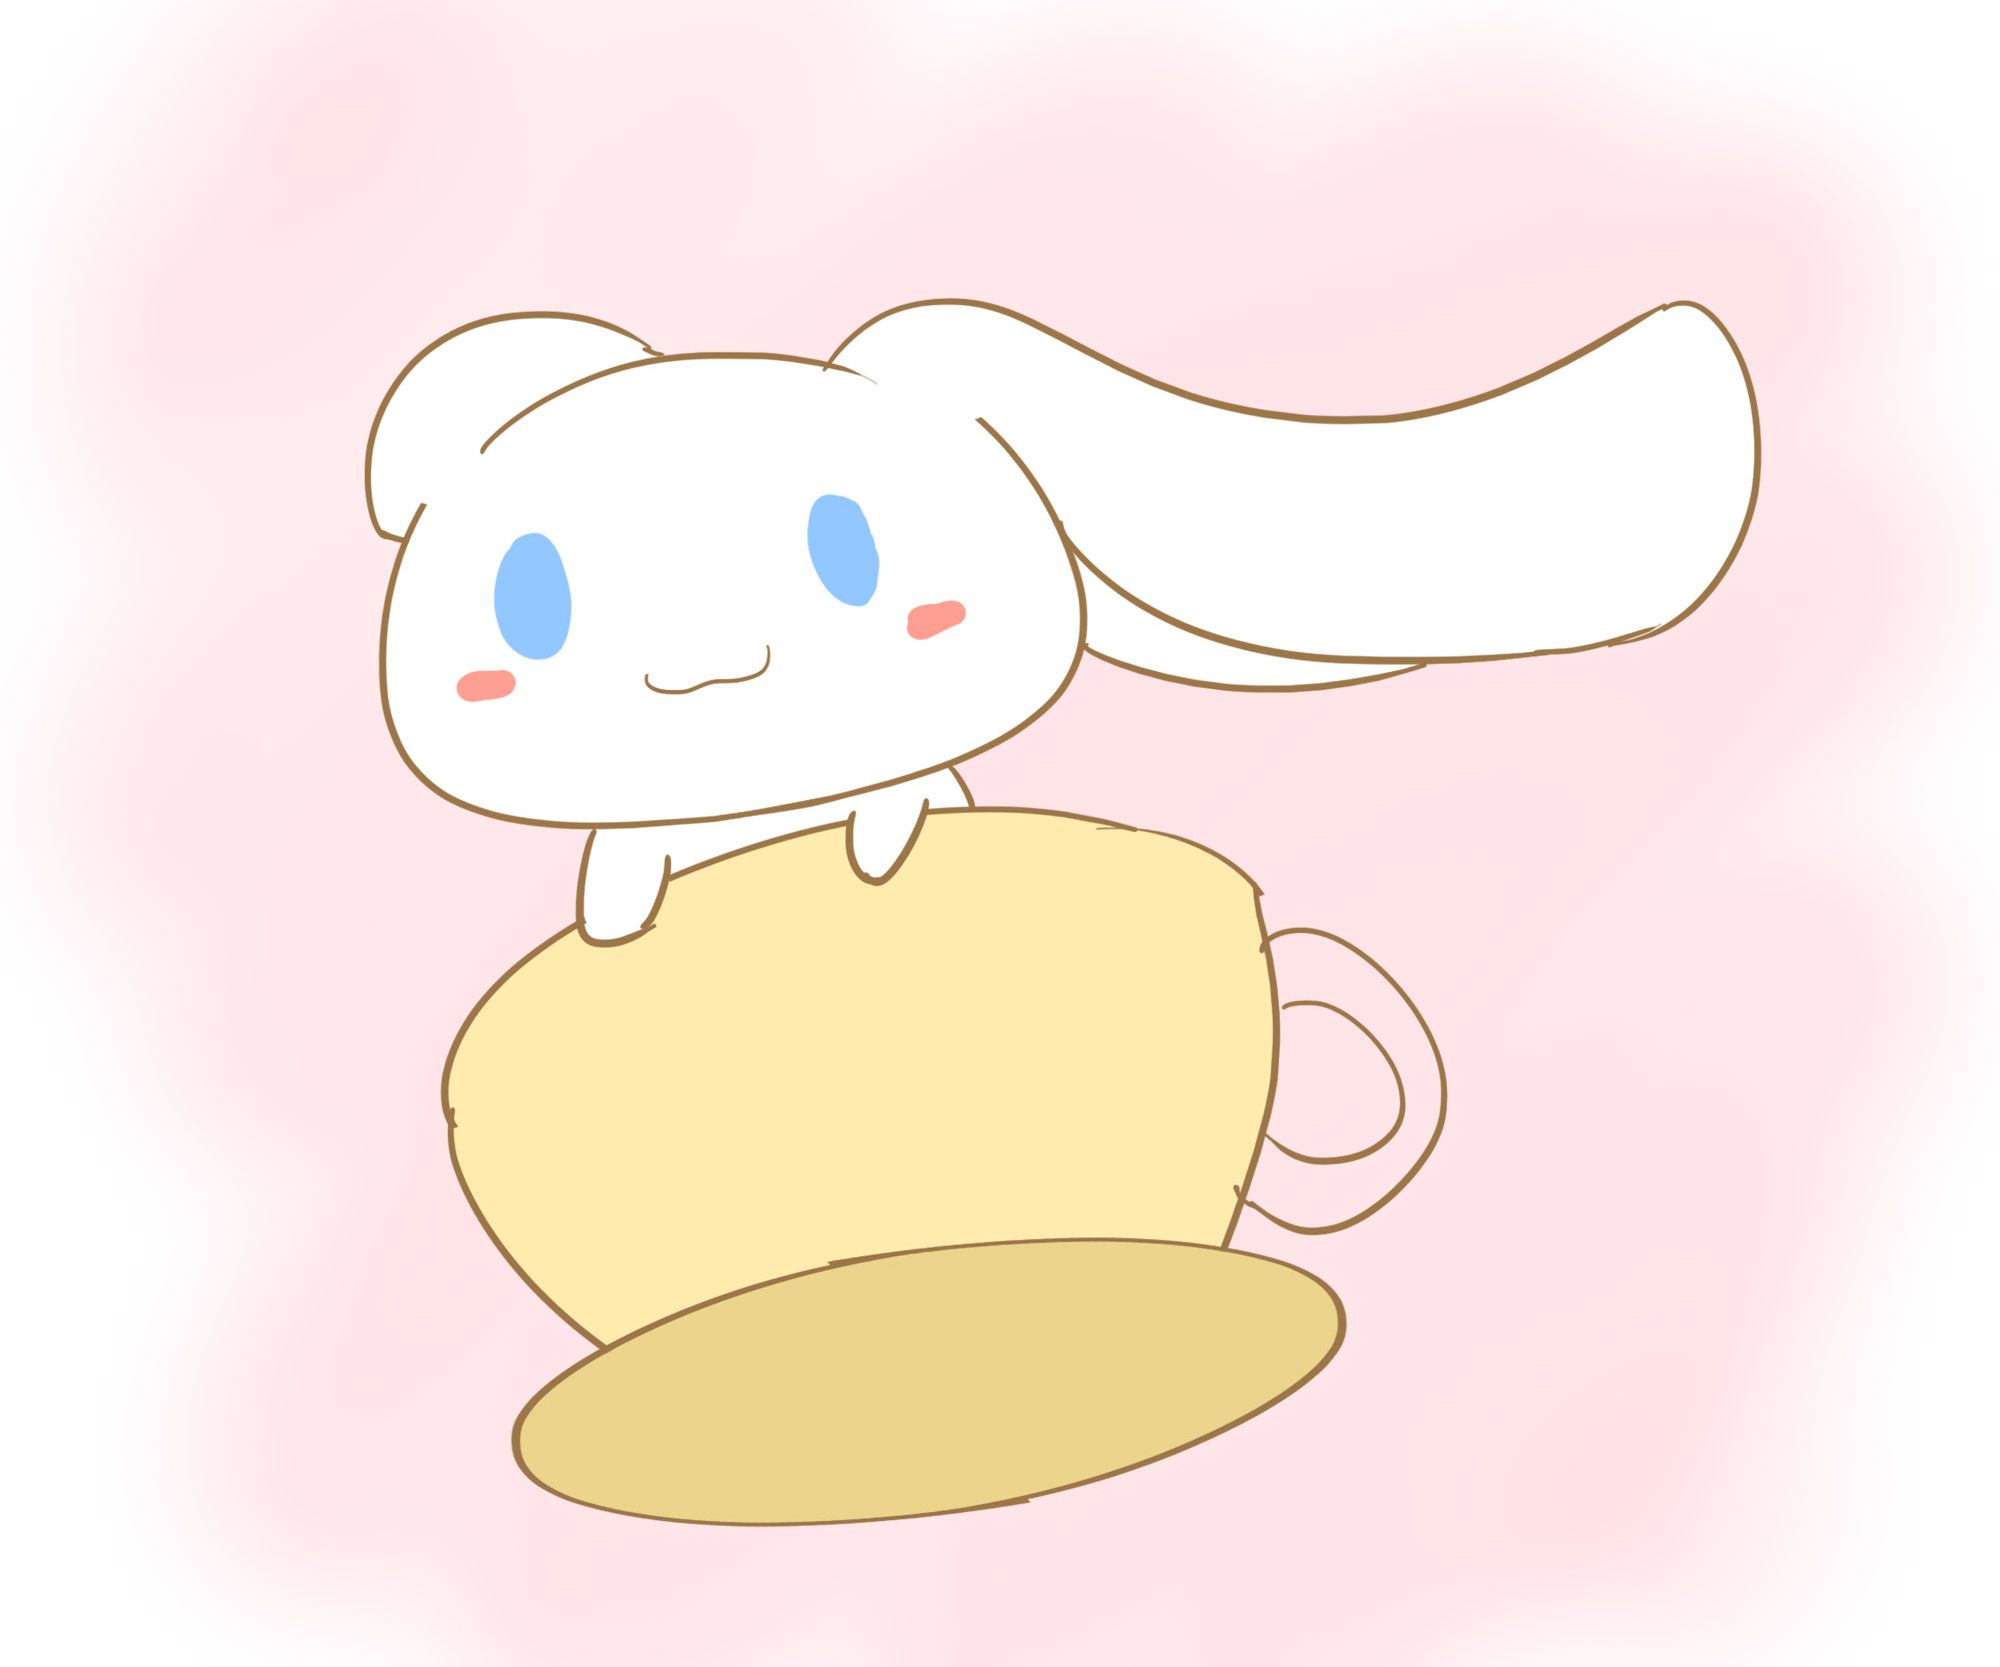 A cute white dog with a pink nose and blue eyes, sitting on top of a yellow teacup. - Cinnamoroll